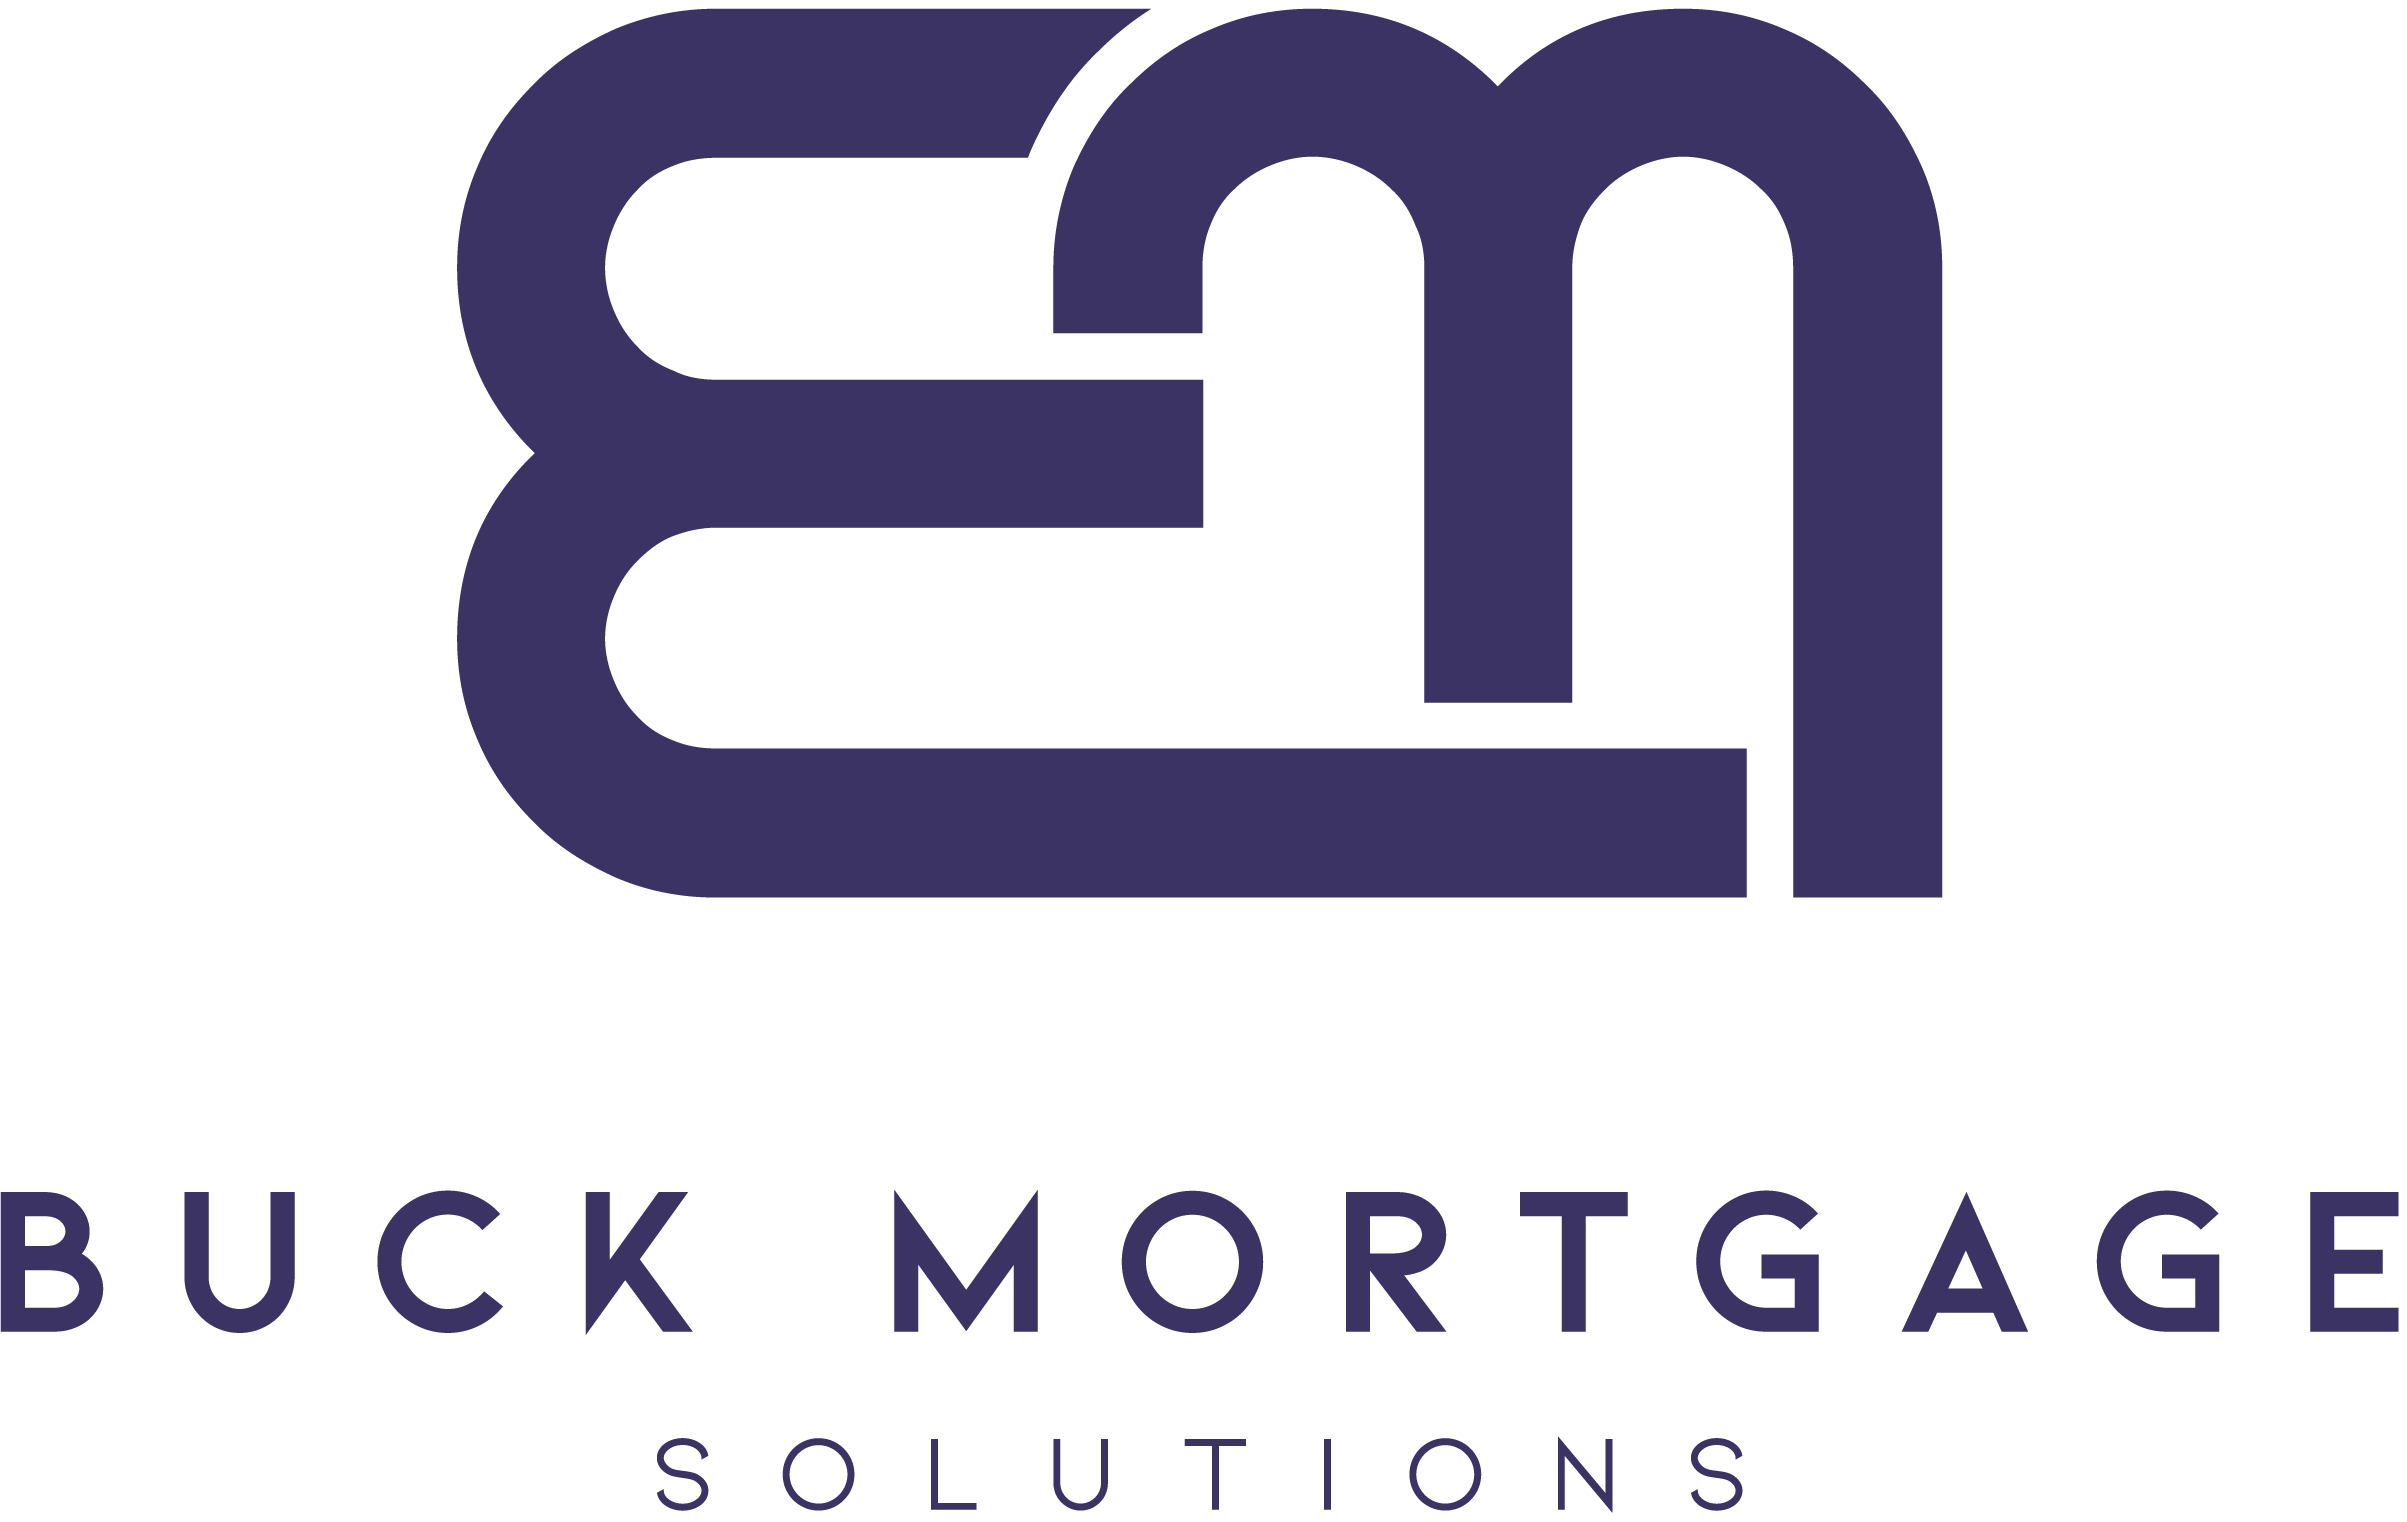 Buck Mortgage Solutions